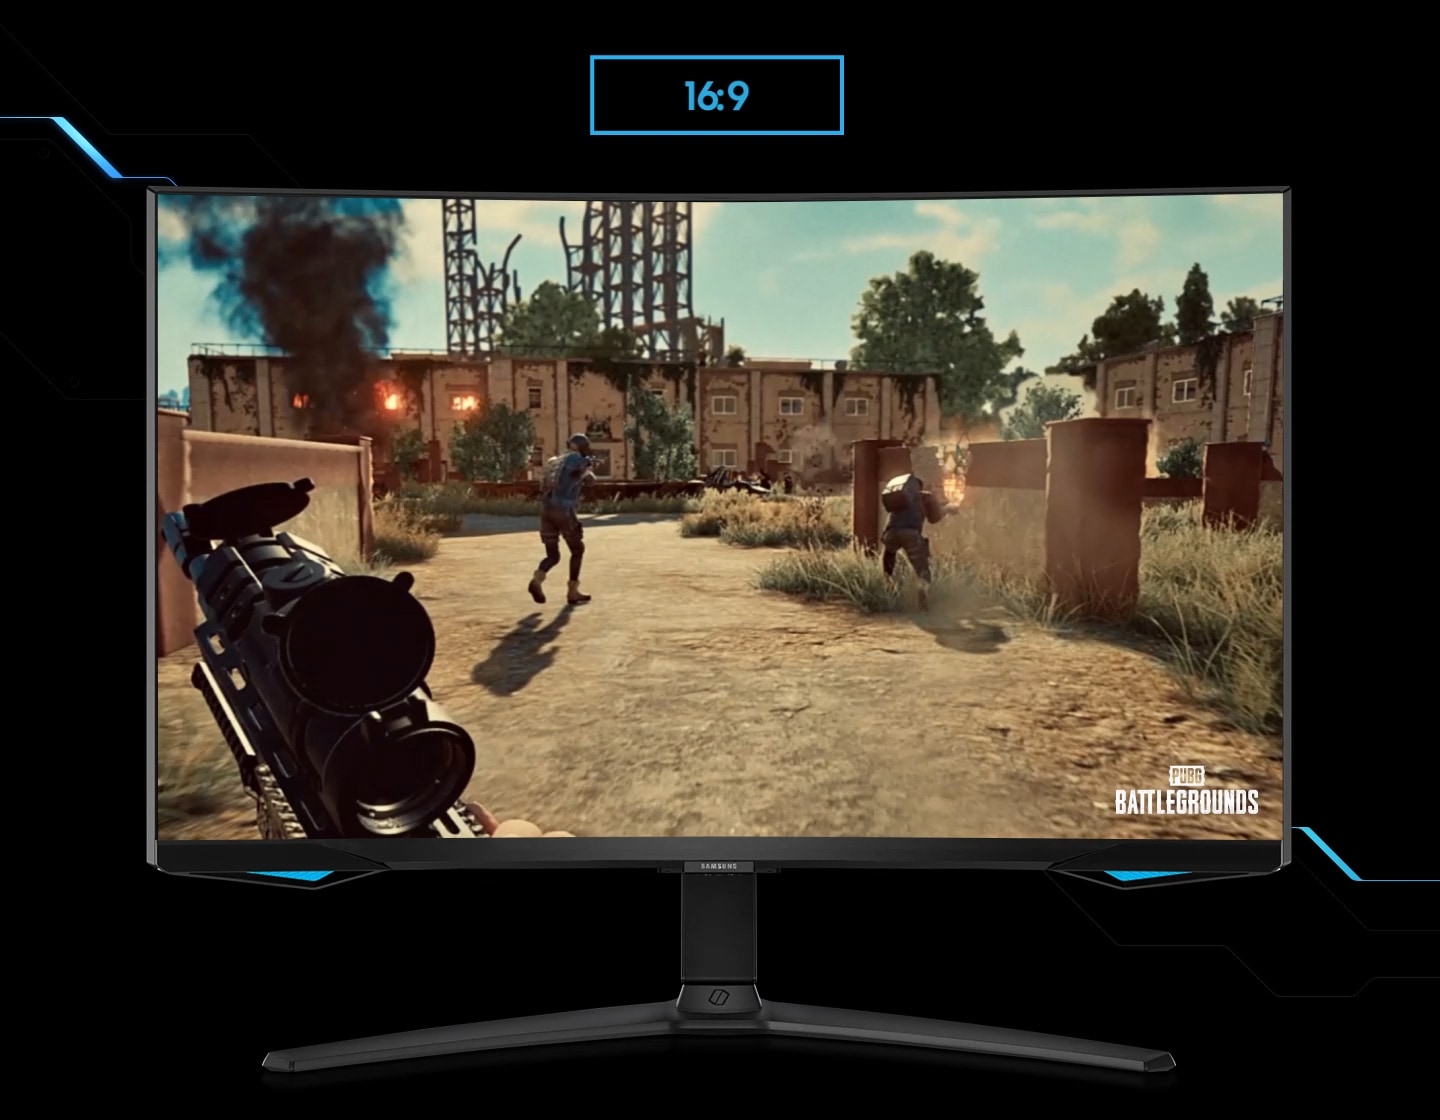 A monitor shows the perspective of a player within a first-person action game. As the screen is extended from 16:9 to 21:9 proportion, an enemy appears in the far left corner, revealed thanks to the monitor's wider perspective. The game title "PUBG BATTLEGROUND" is located in the lower right corner.